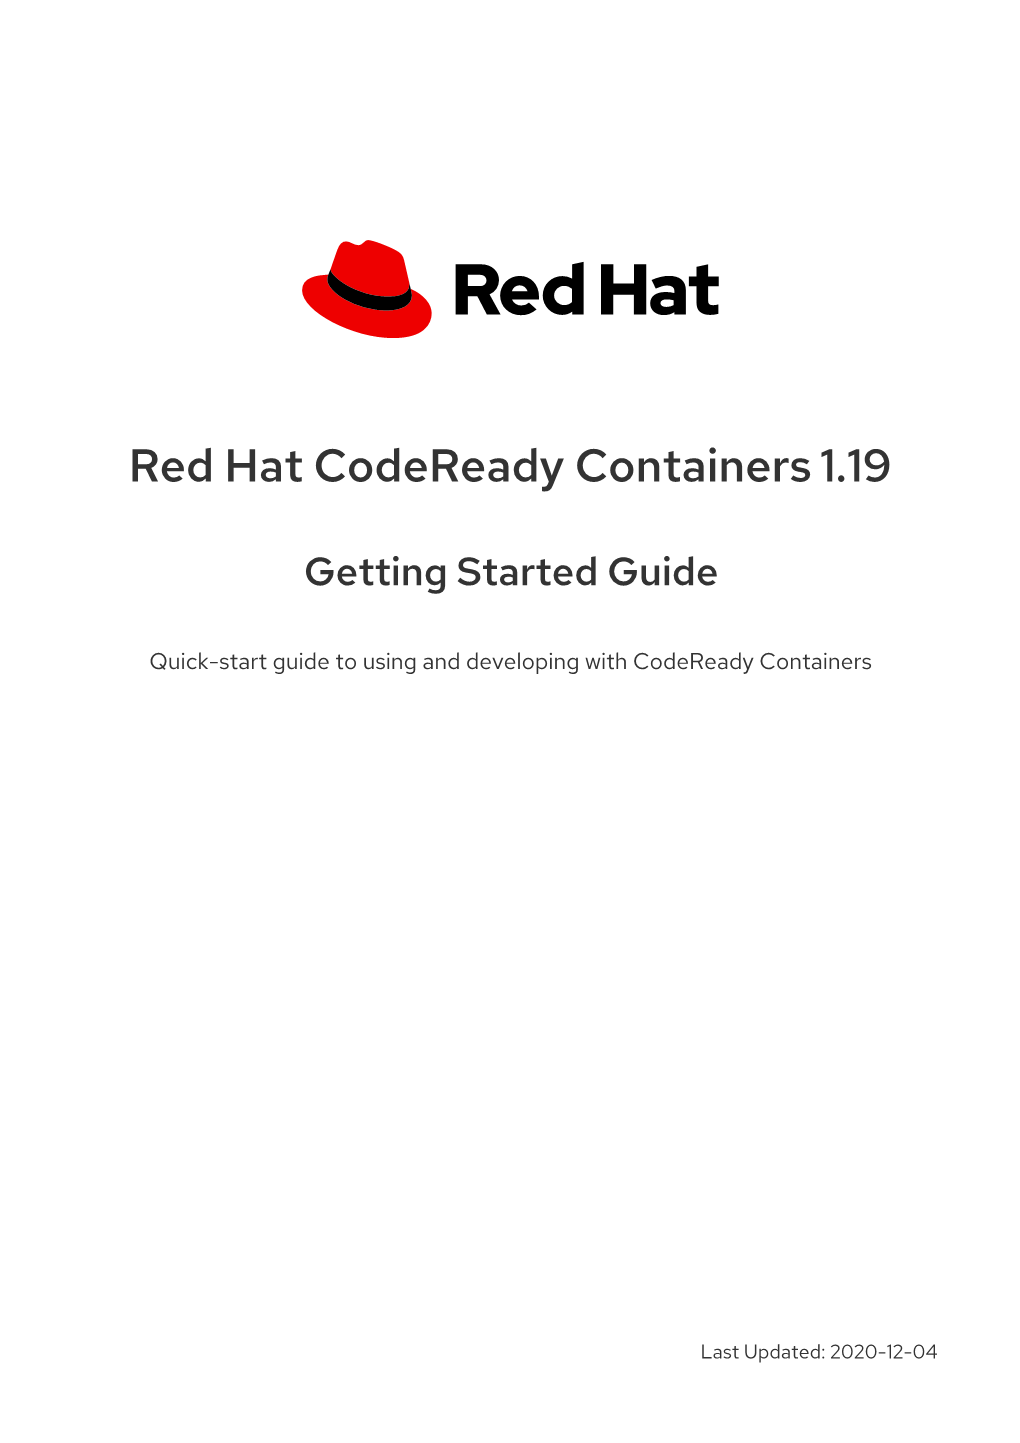 Red Hat Codeready Containers 1.19 Getting Started Guide